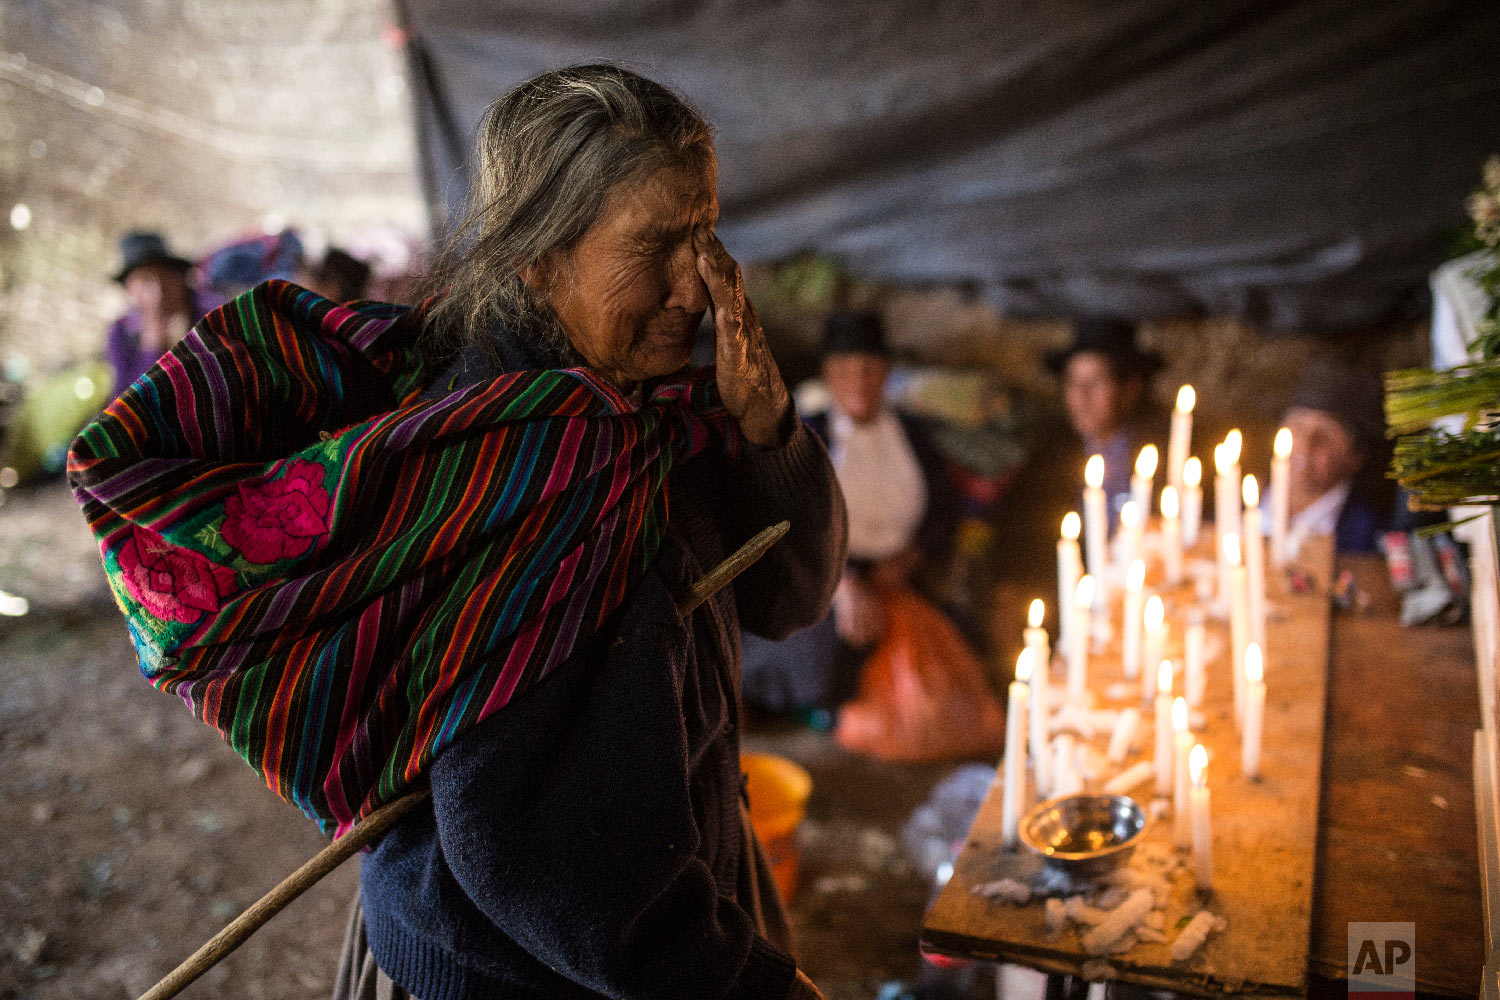  In this Aug. 15, 2018 photo, Paulina Tineo Canchari cries as she stands before the many coffins of relatives killed by the Shining Path guerrillas and the Peruvian army in the 1980s, during their proper burial in Quinuas, in Peru's Ayacucho province